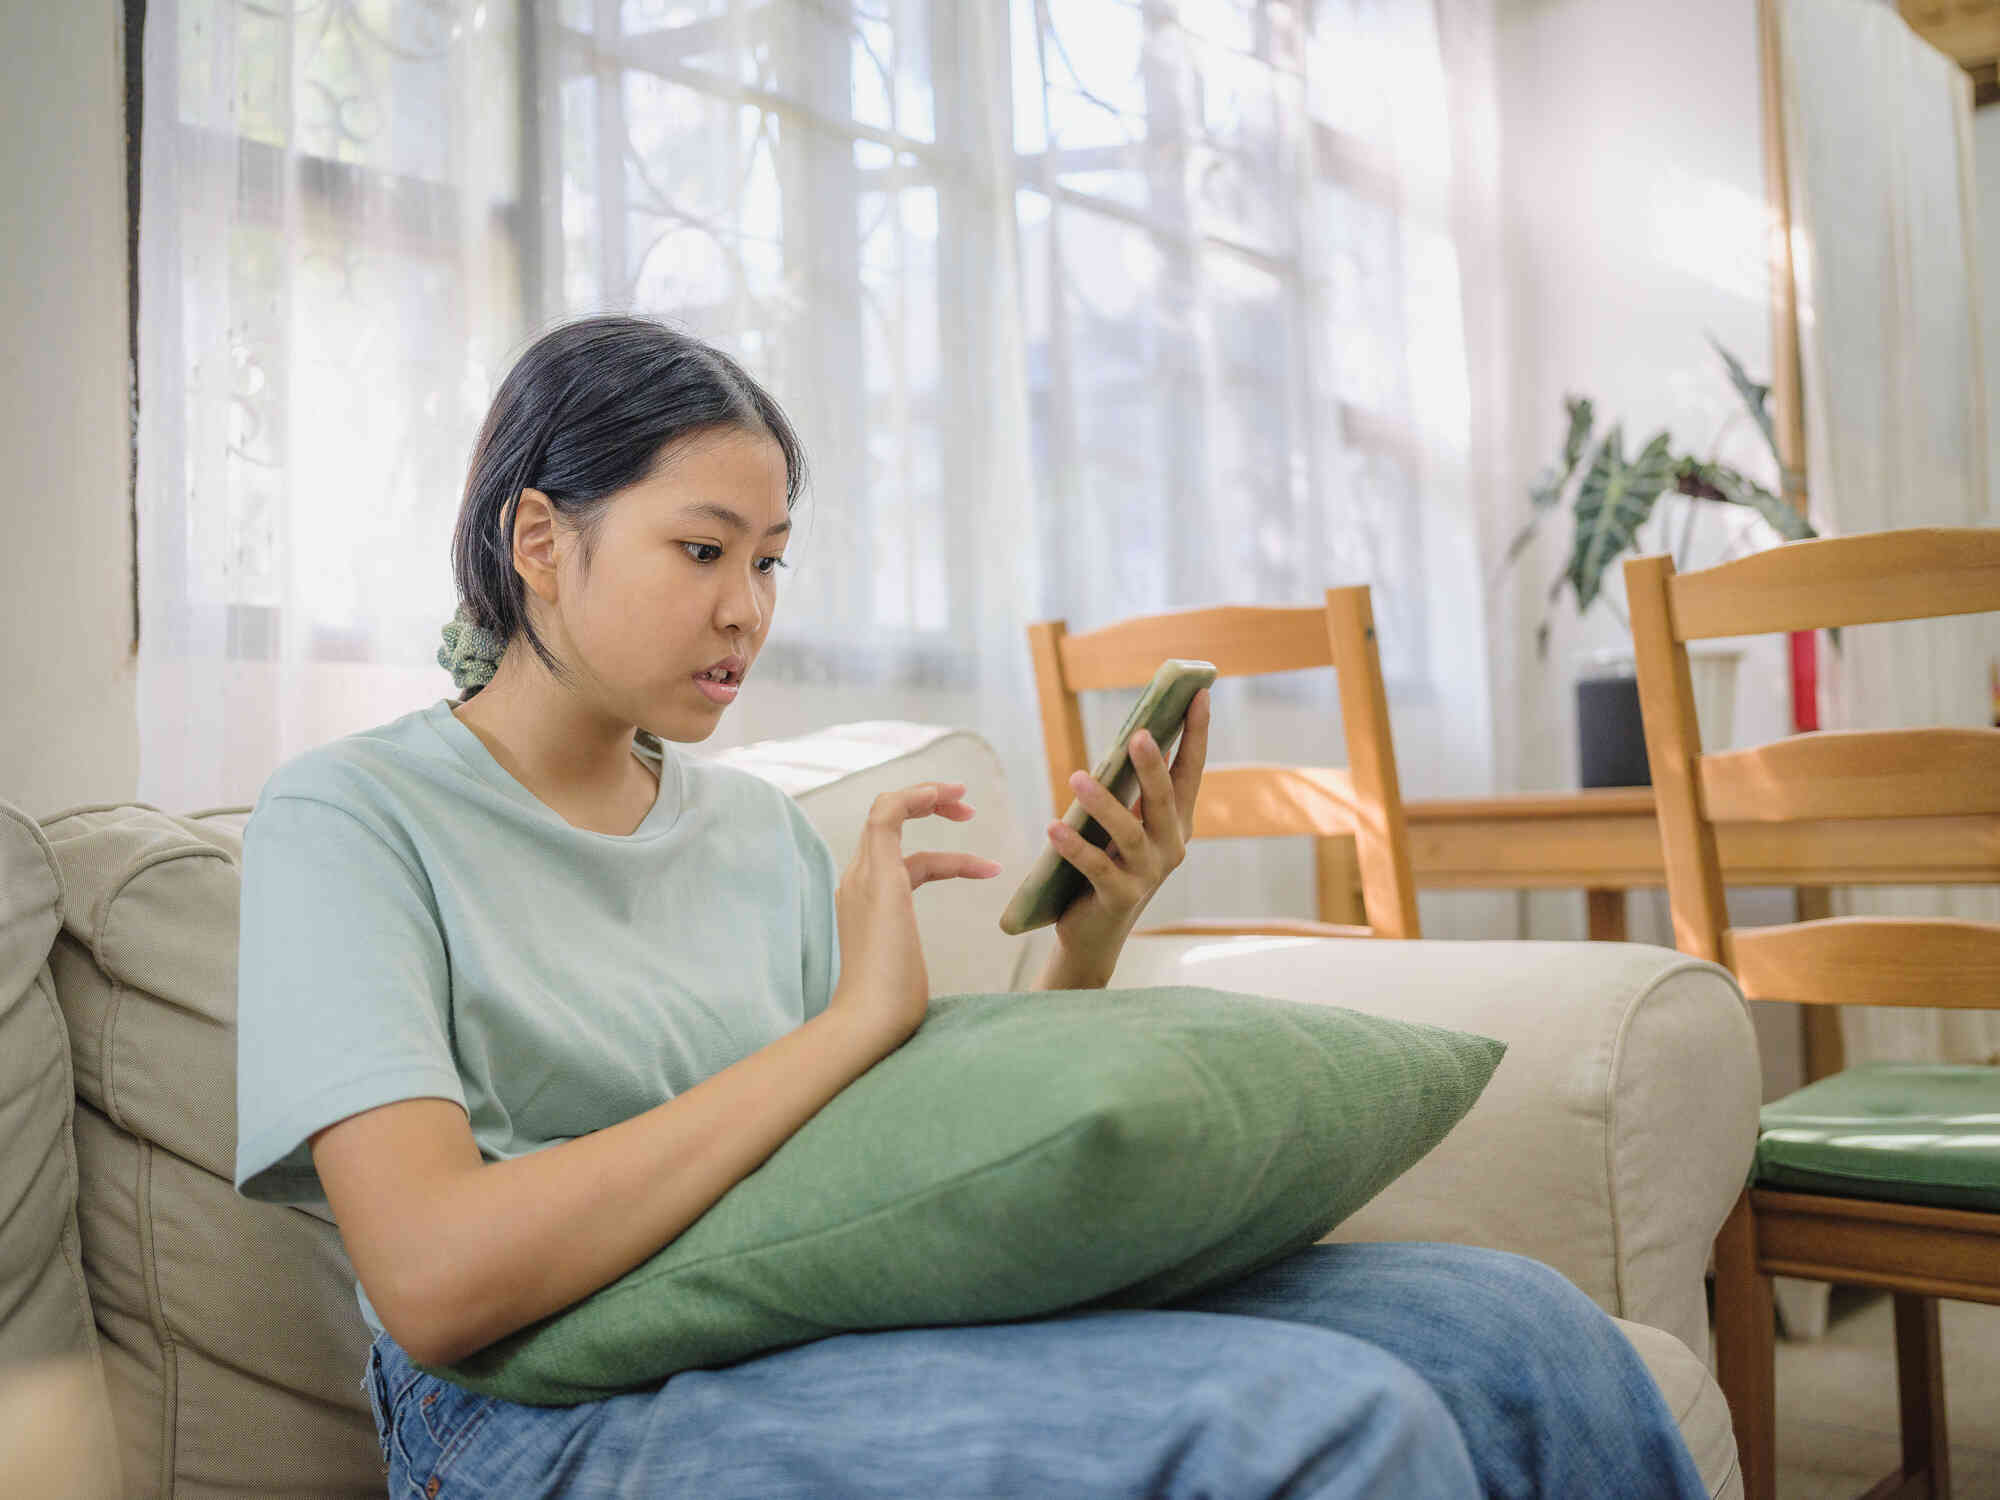 A teen girl in a green shirt sits on the couch and looks at the cellphone in her hand with a worried expression.